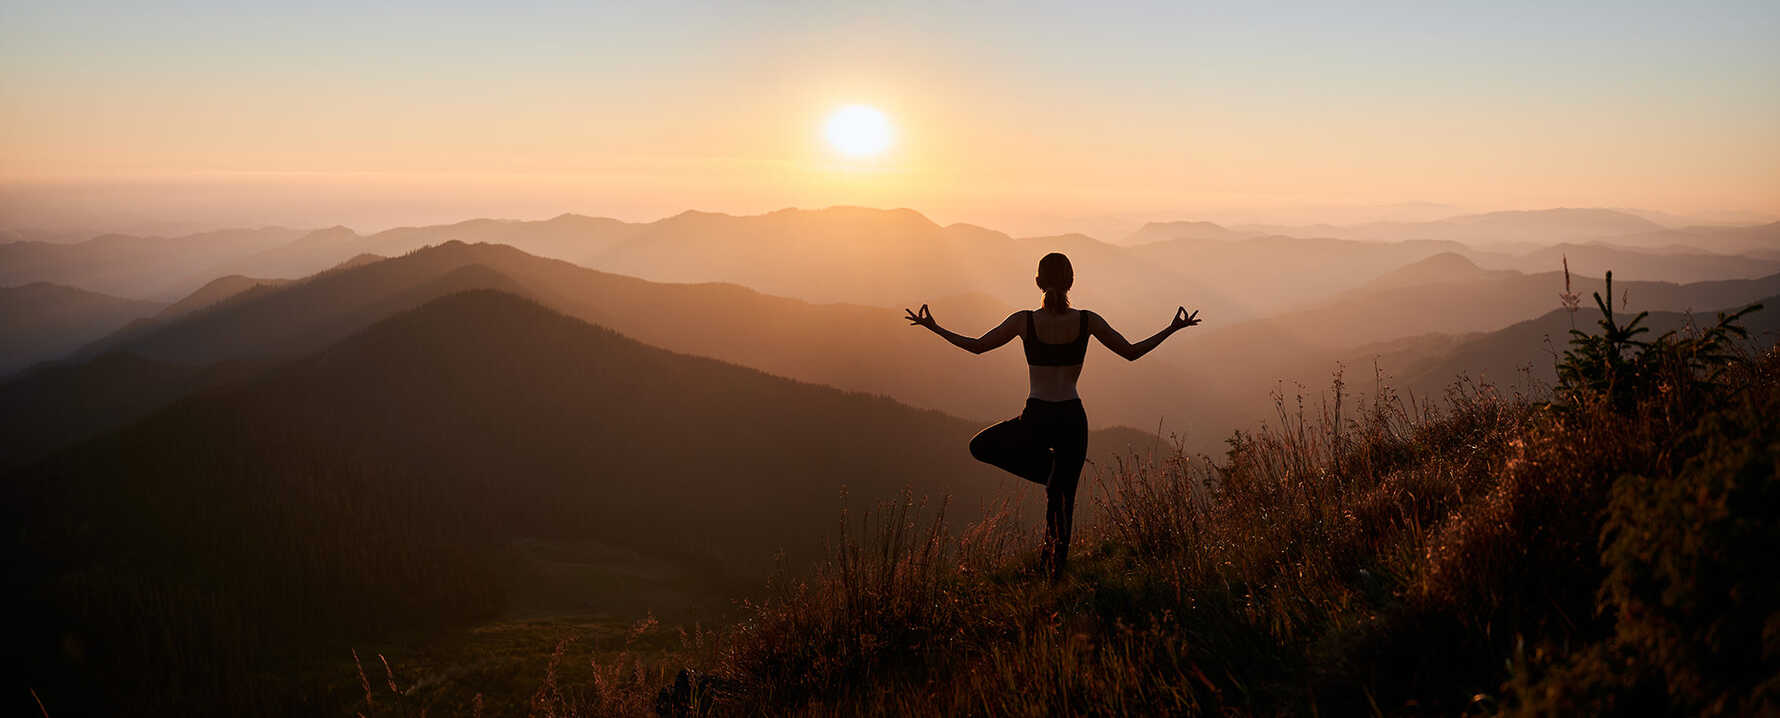 A person doing yoga in the mountains